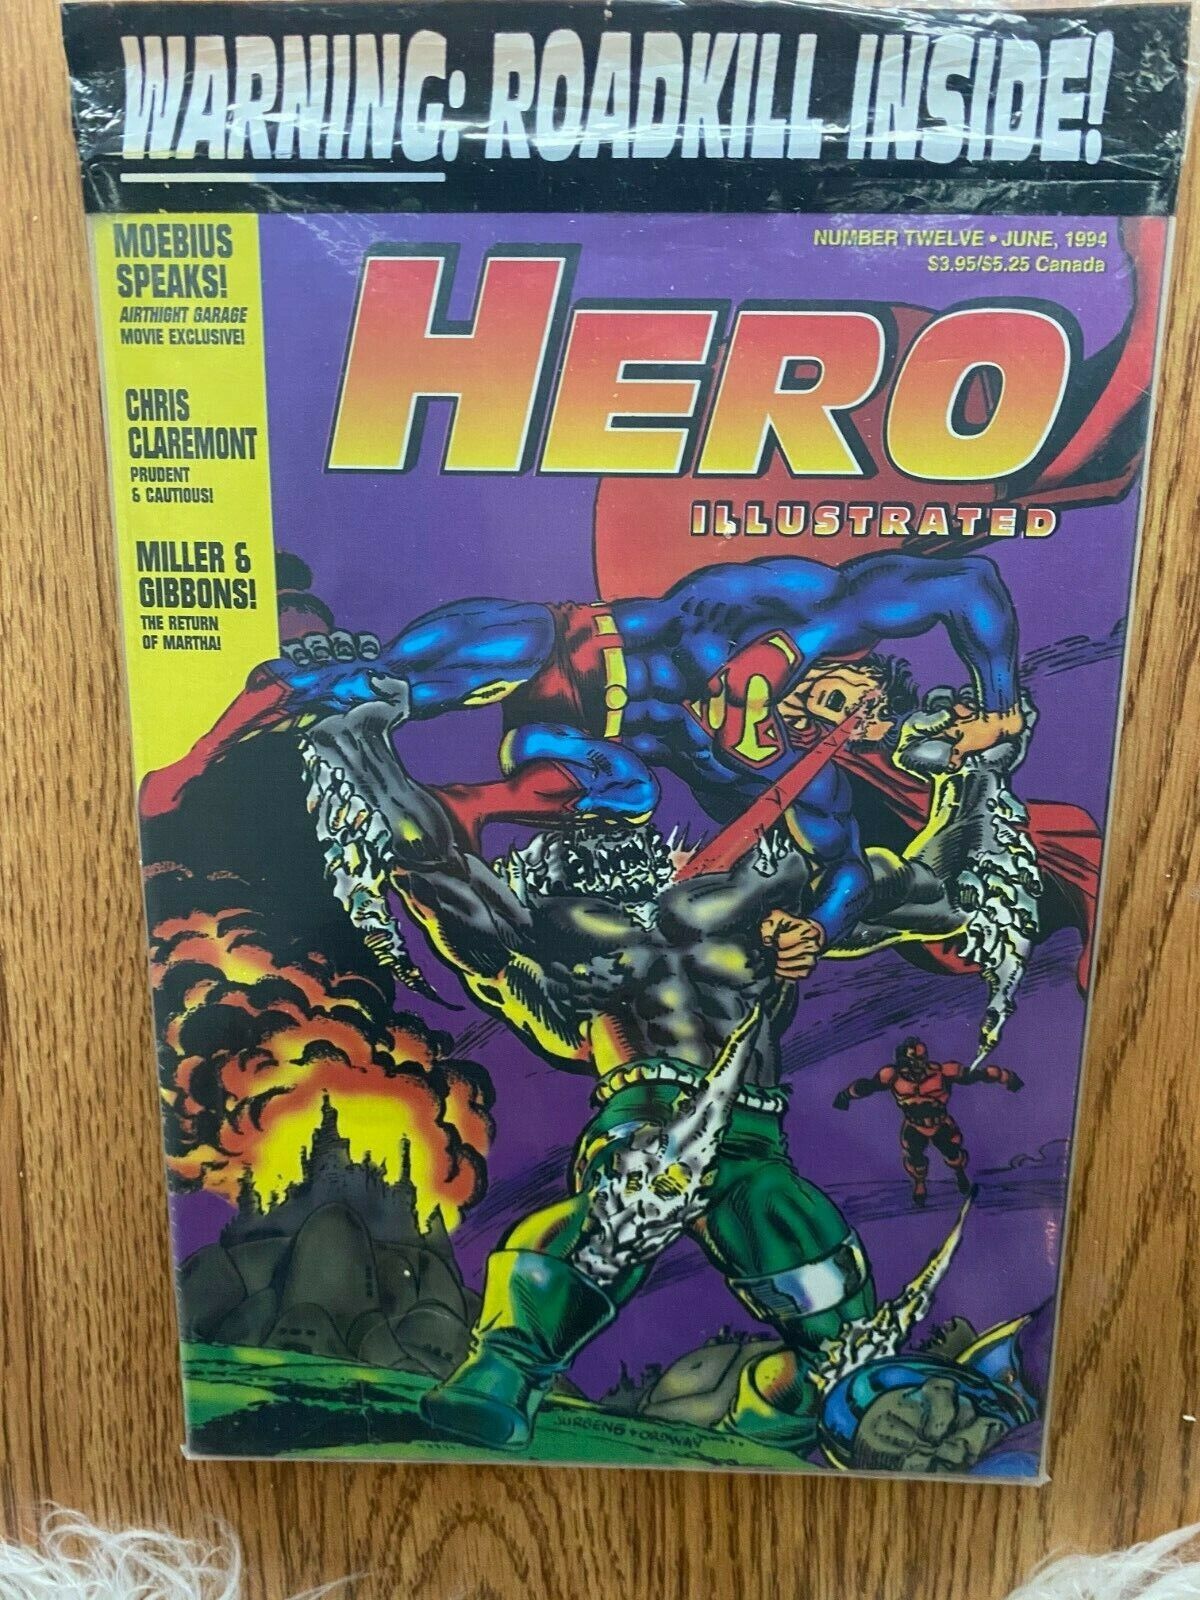 Hero Illustrated Number 12 Sealed With Boba Fett - High Grade Comic Book -B69-21